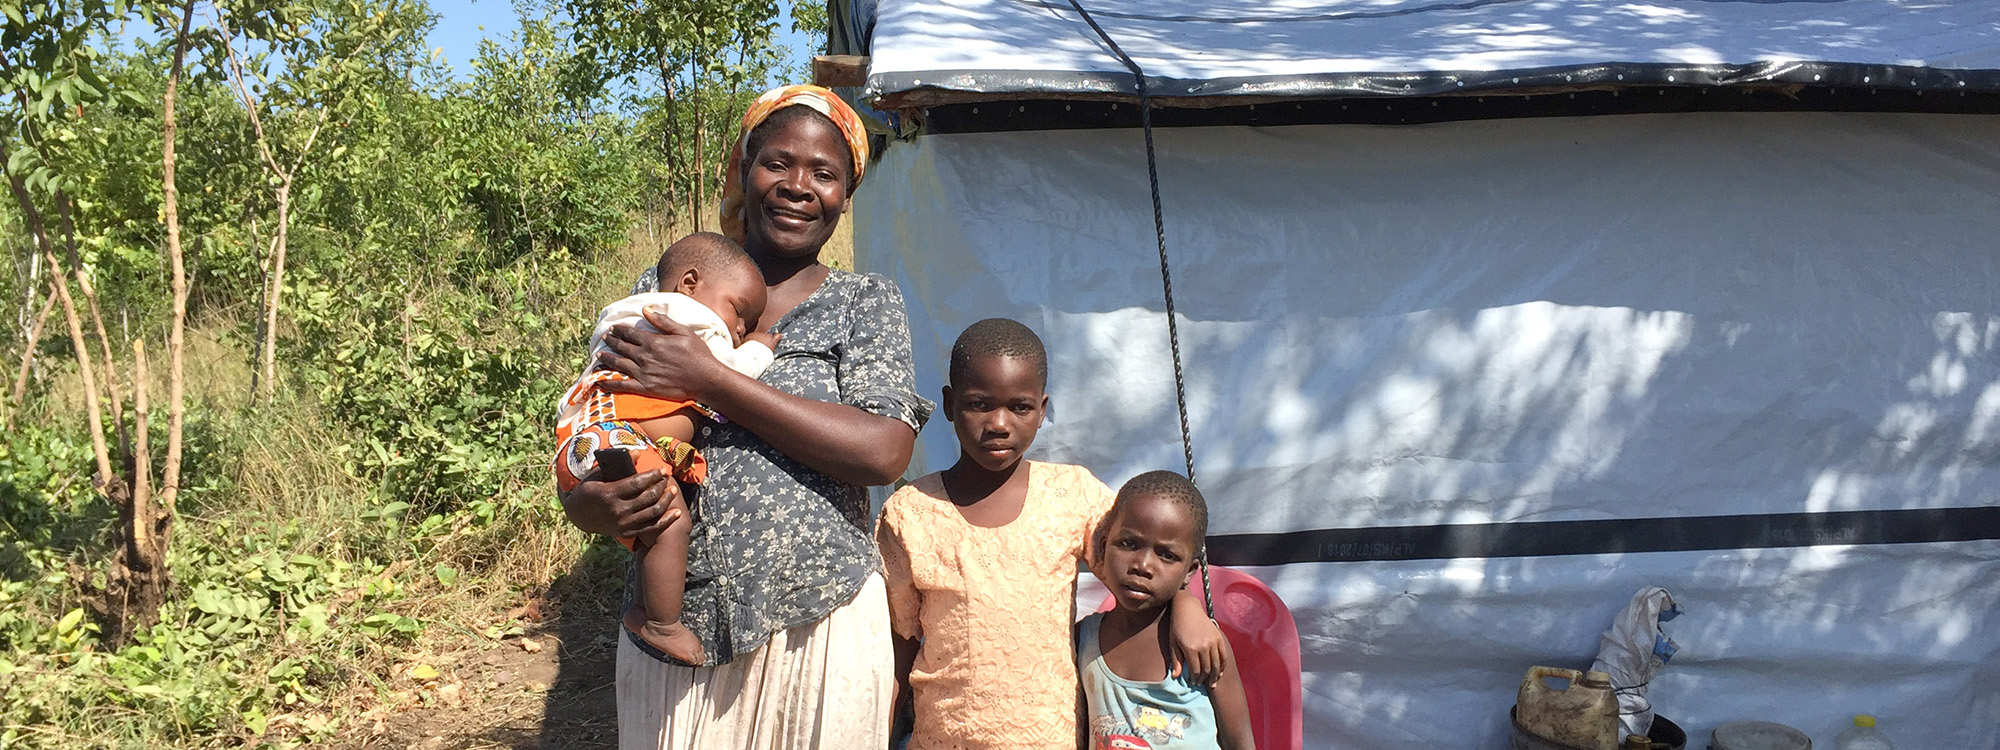 A mother and three children standing in front of a repaired shelter in Malawi